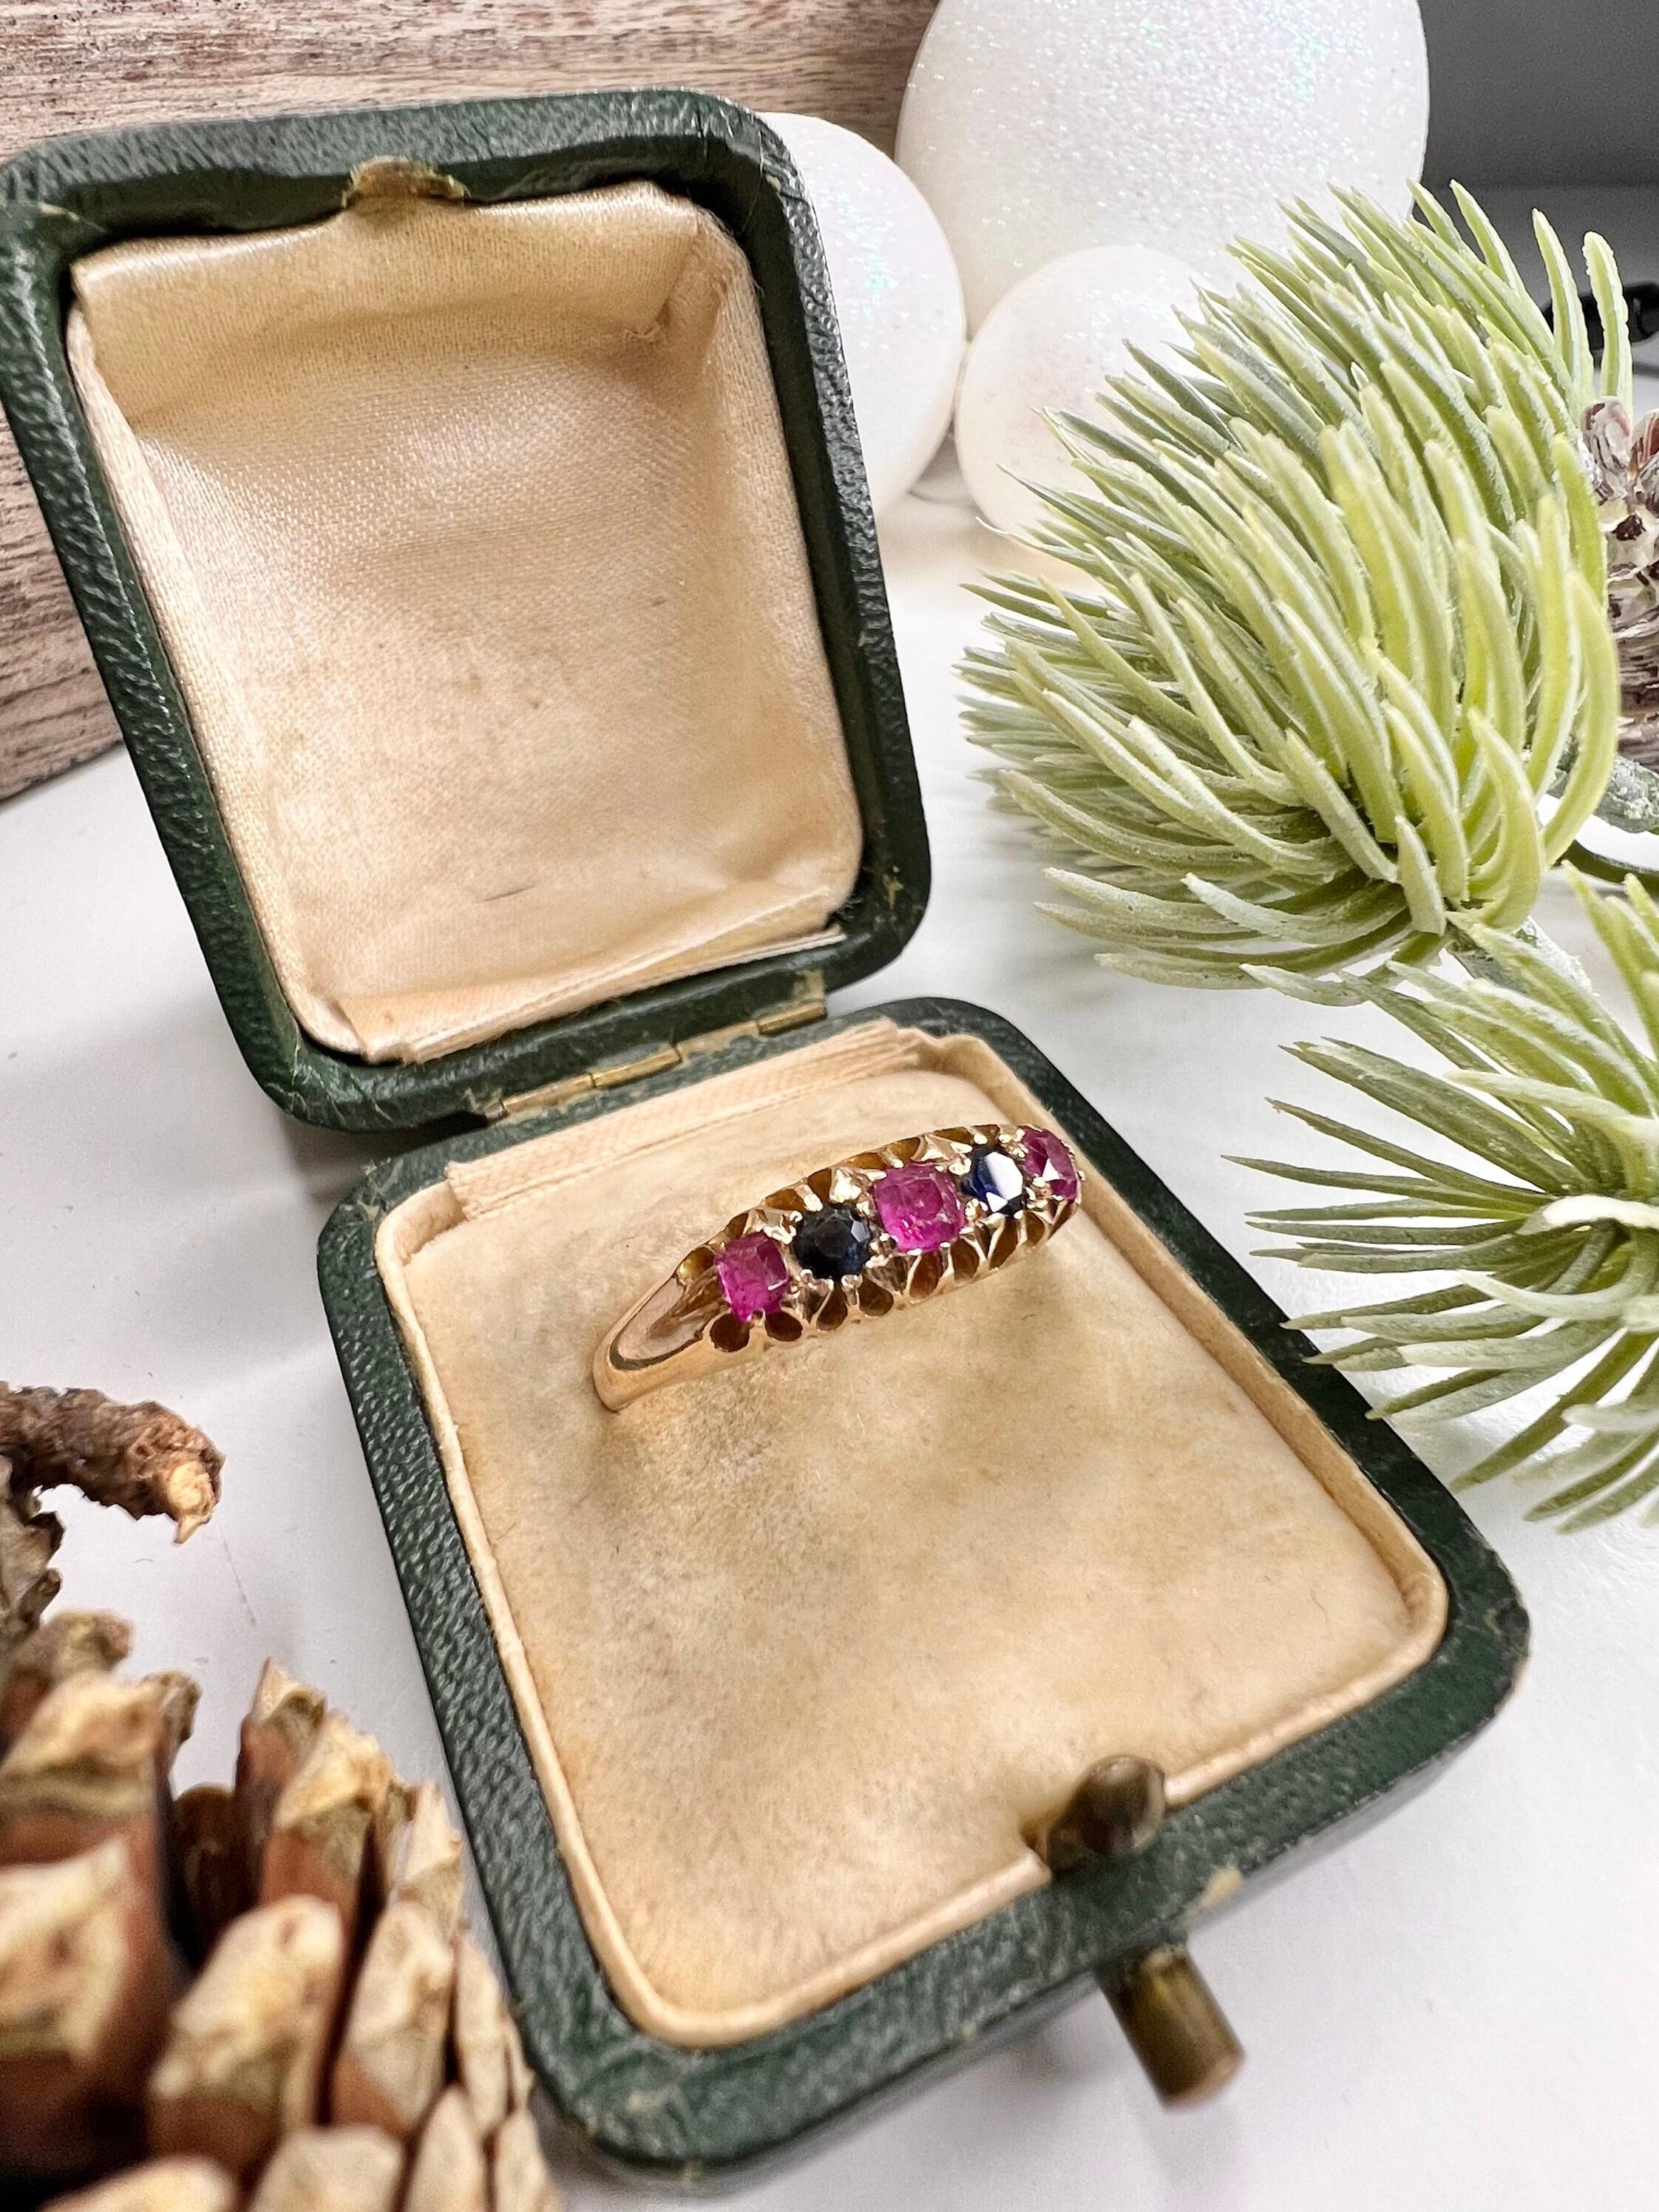 Antique Sapphire & Ruby Ring

15ct Gold 

Hallmarked Birmingham 1873

Gorgeous Ring Set with Fabulous Coloured Sapphires & Rubies 

UK Size Q

US 8 1/4

Can be resized using our resizing service,
please contact us for more information

All of our